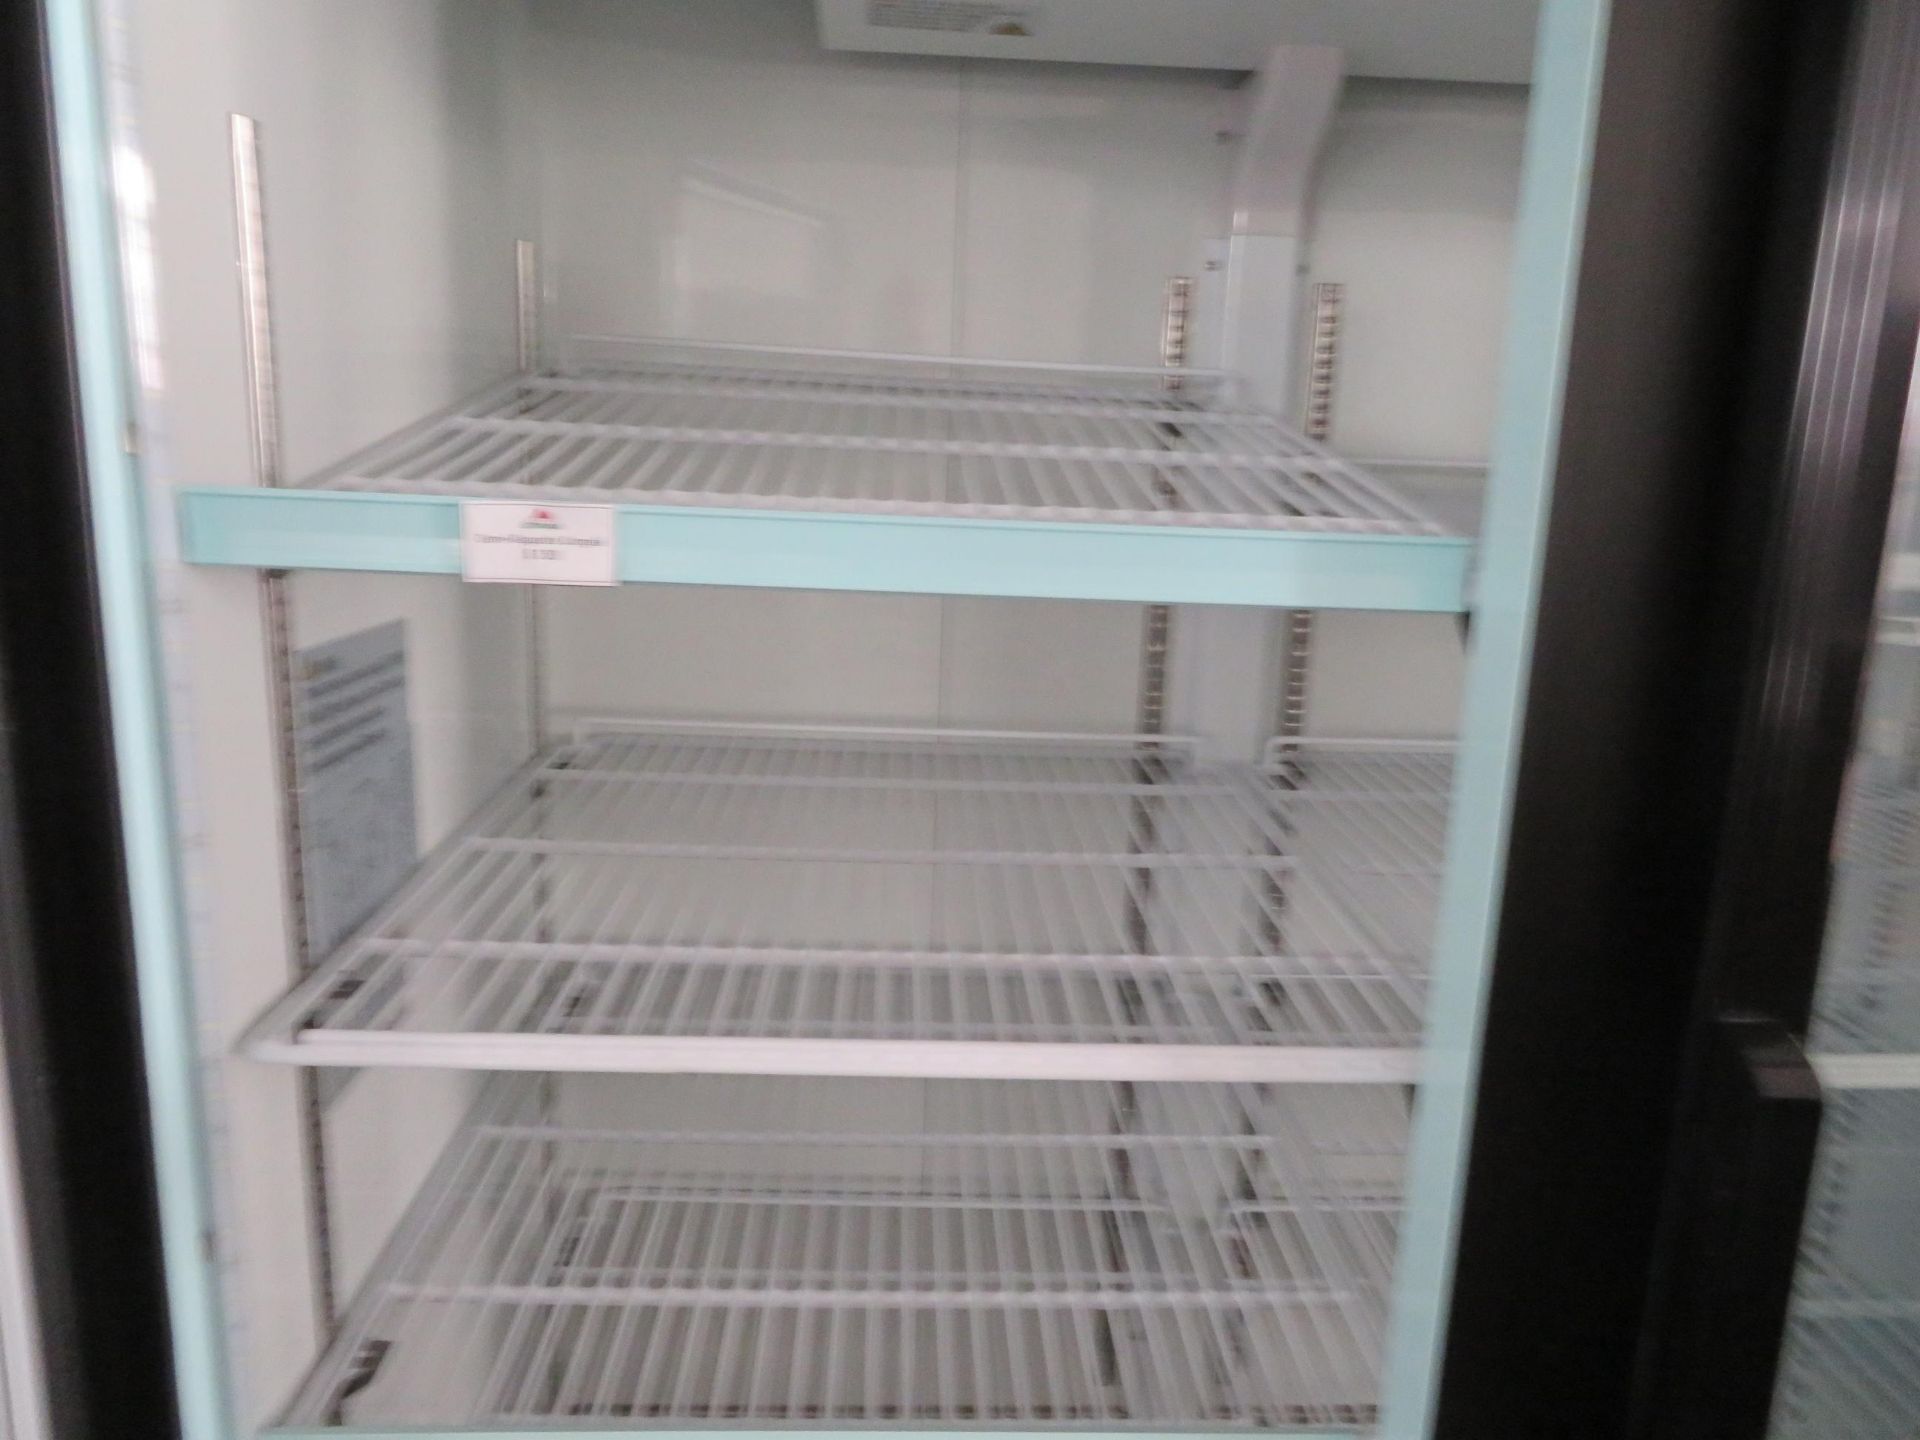 IFI 2 glass door refrigerated unit on wheels, Mod # FGH48B, approx. 53"w x 32"d x 83"h - Image 2 of 2